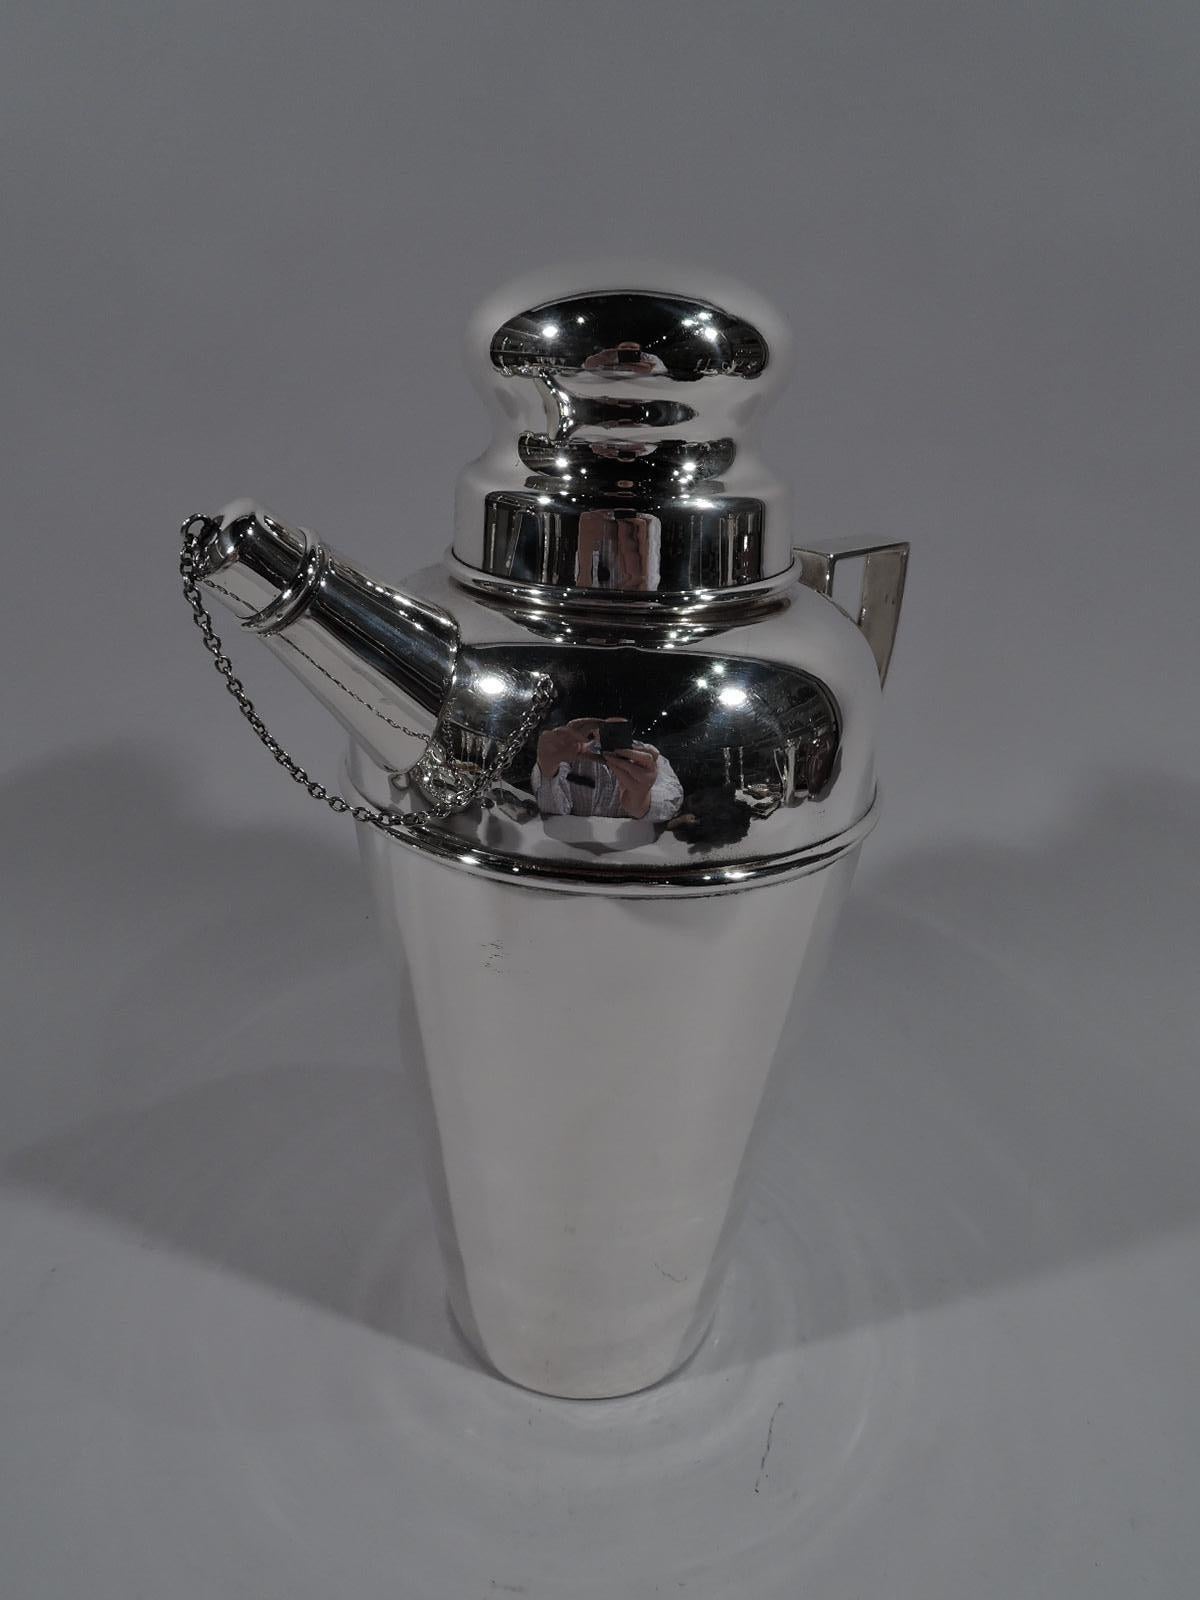 American Art Deco sterling silver cocktail Shaker, circa 1925. Straight and tapering bowl, curved shoulder, short inset neck, and sleek scroll-bracket handle. Bun cover and stubby diagonal spout with chained cap. Cover and chain fit snuggly. Marked